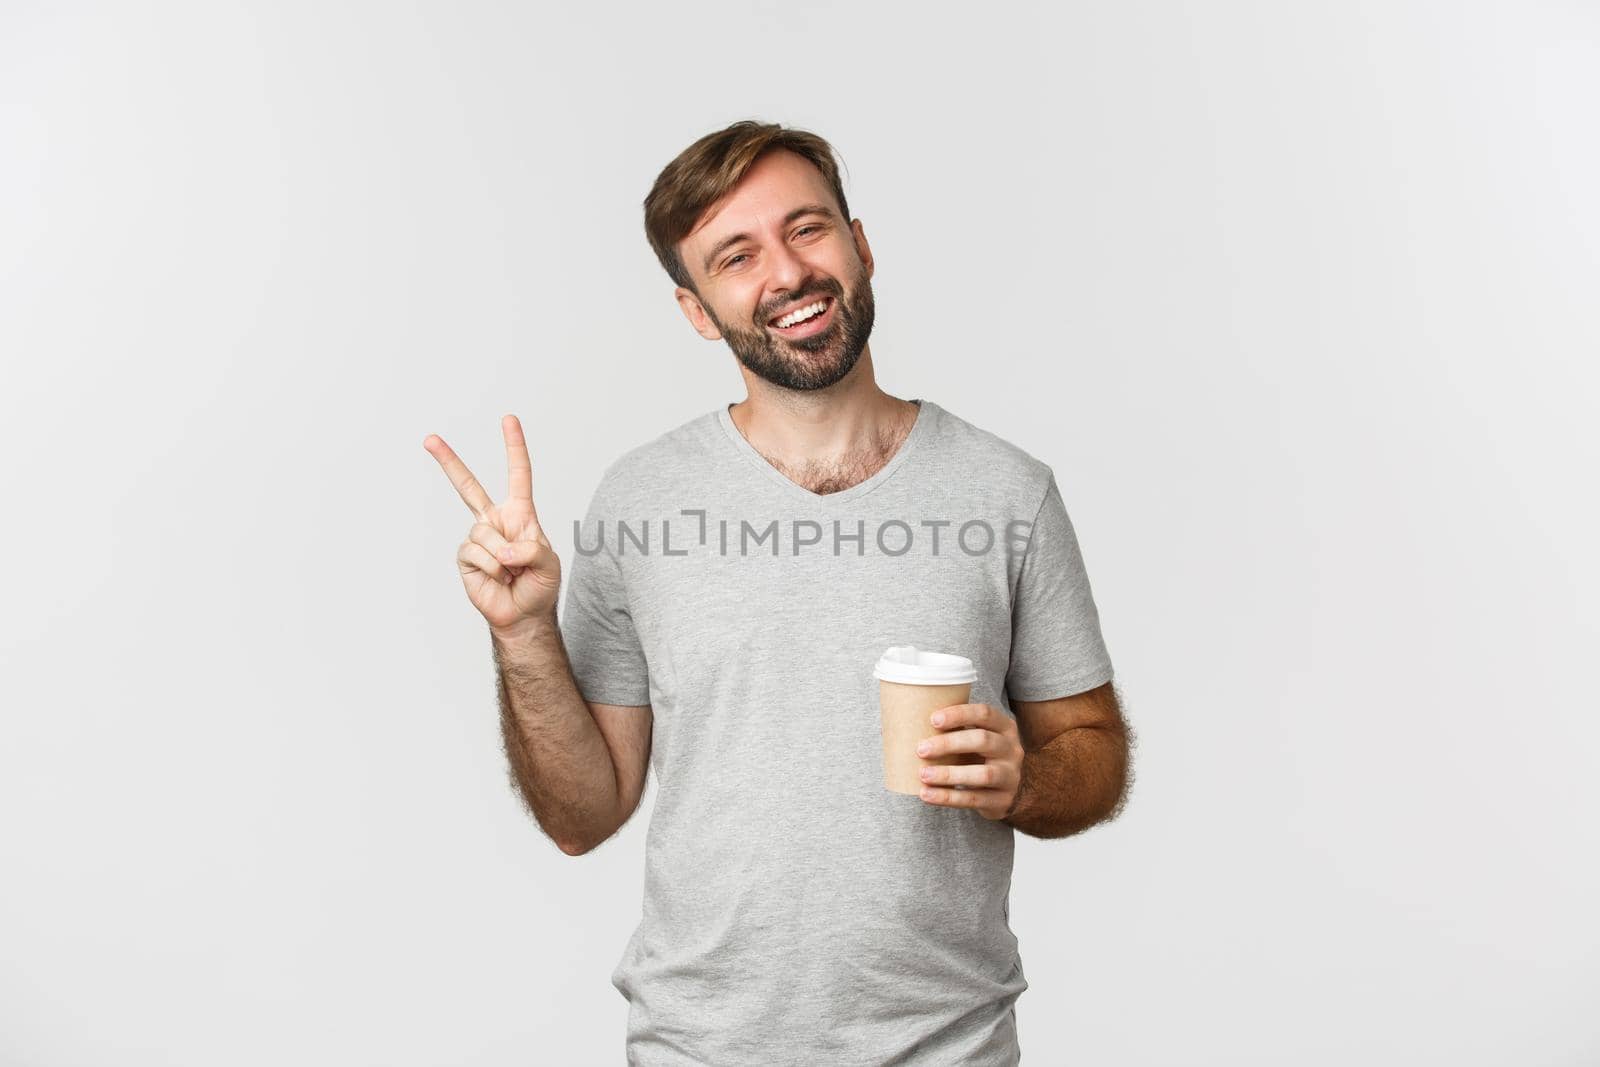 Portrait of carefree smiling man in gray t-shirt, drinking coffee and showing peace sign, standing over white background.